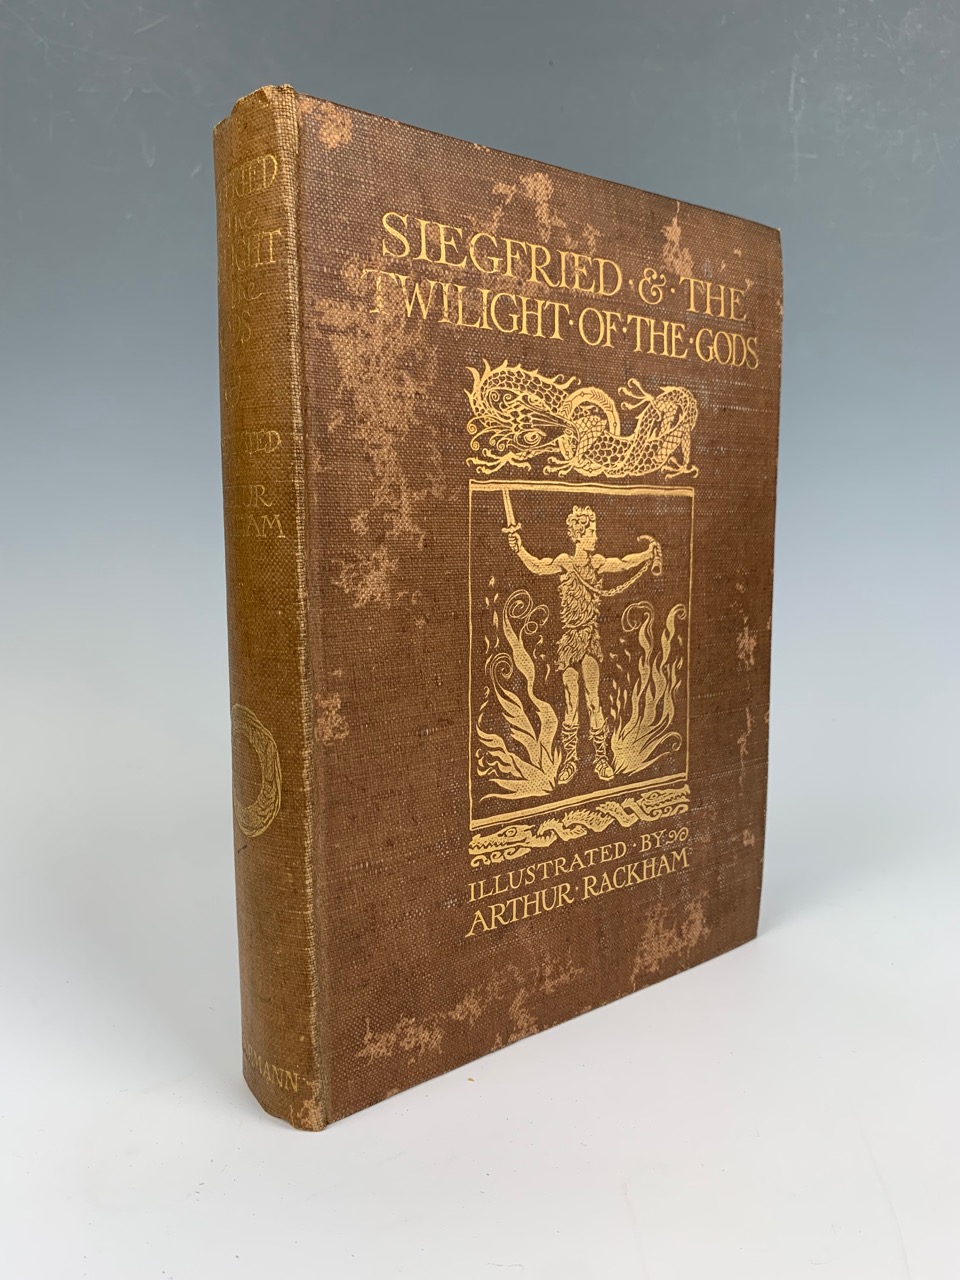 "Siegfried and the Twilight of the Gods" by Richard Wagner, with illustrations by Arthur Rackham,